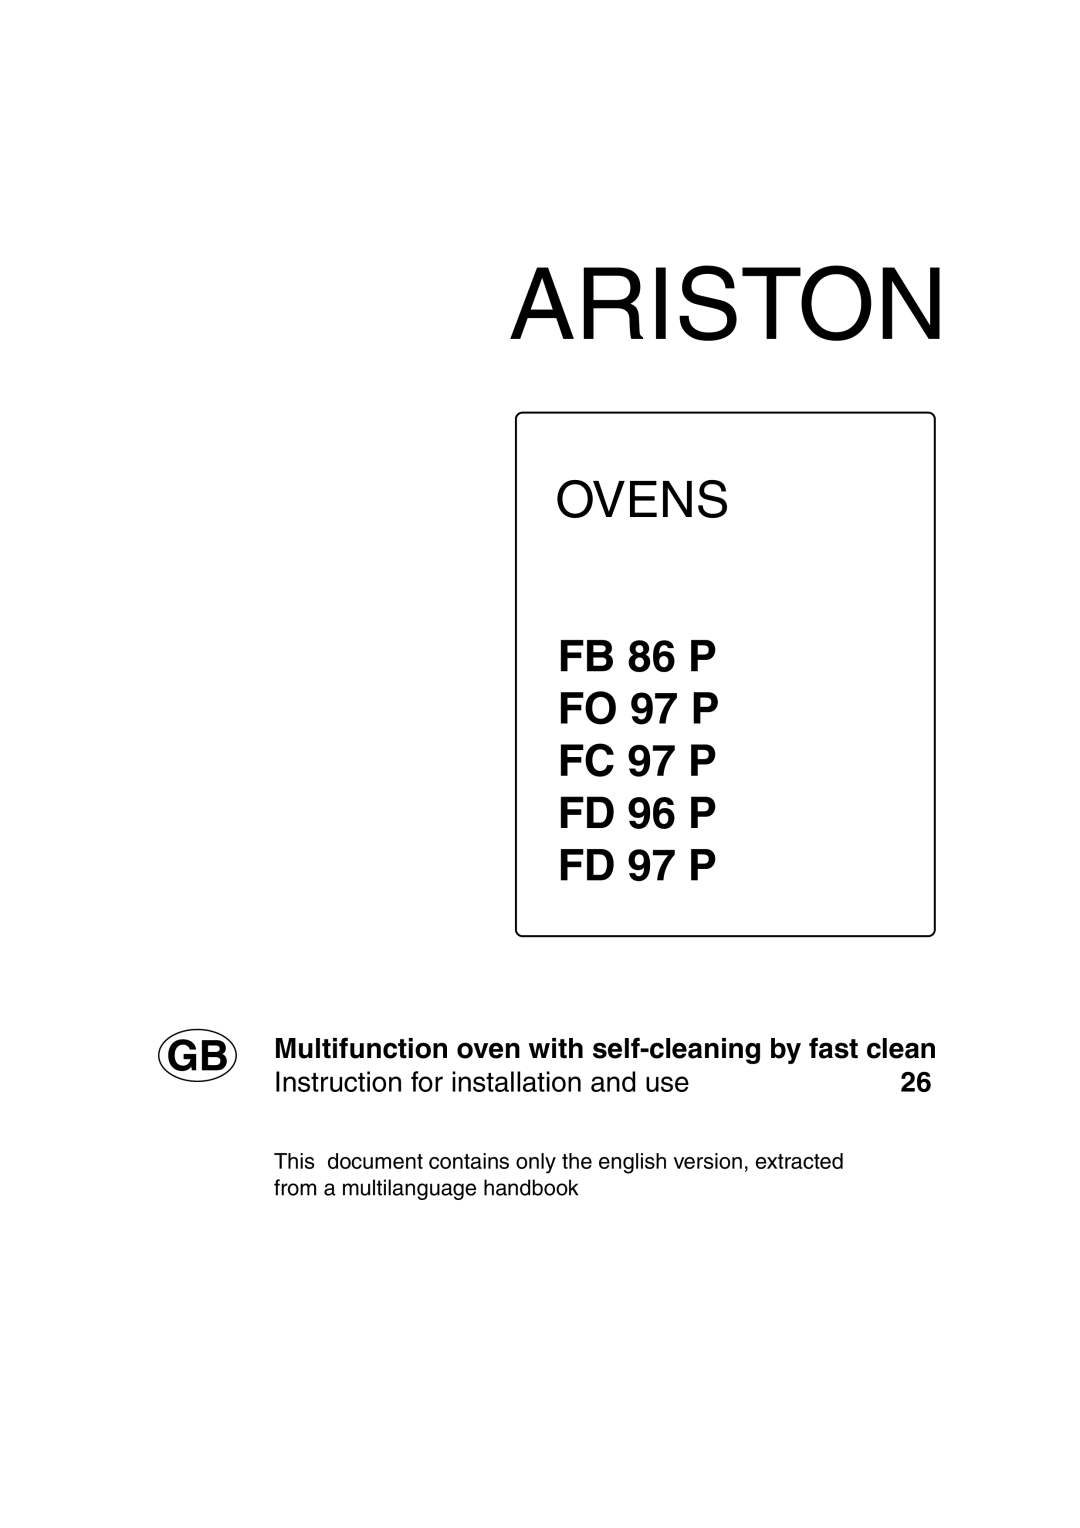 Ariston manual FB 86 P FO 97 P FC 97 P FD 96 P FD 97 P, Ariston, Ovens, Instruction for installation and use 